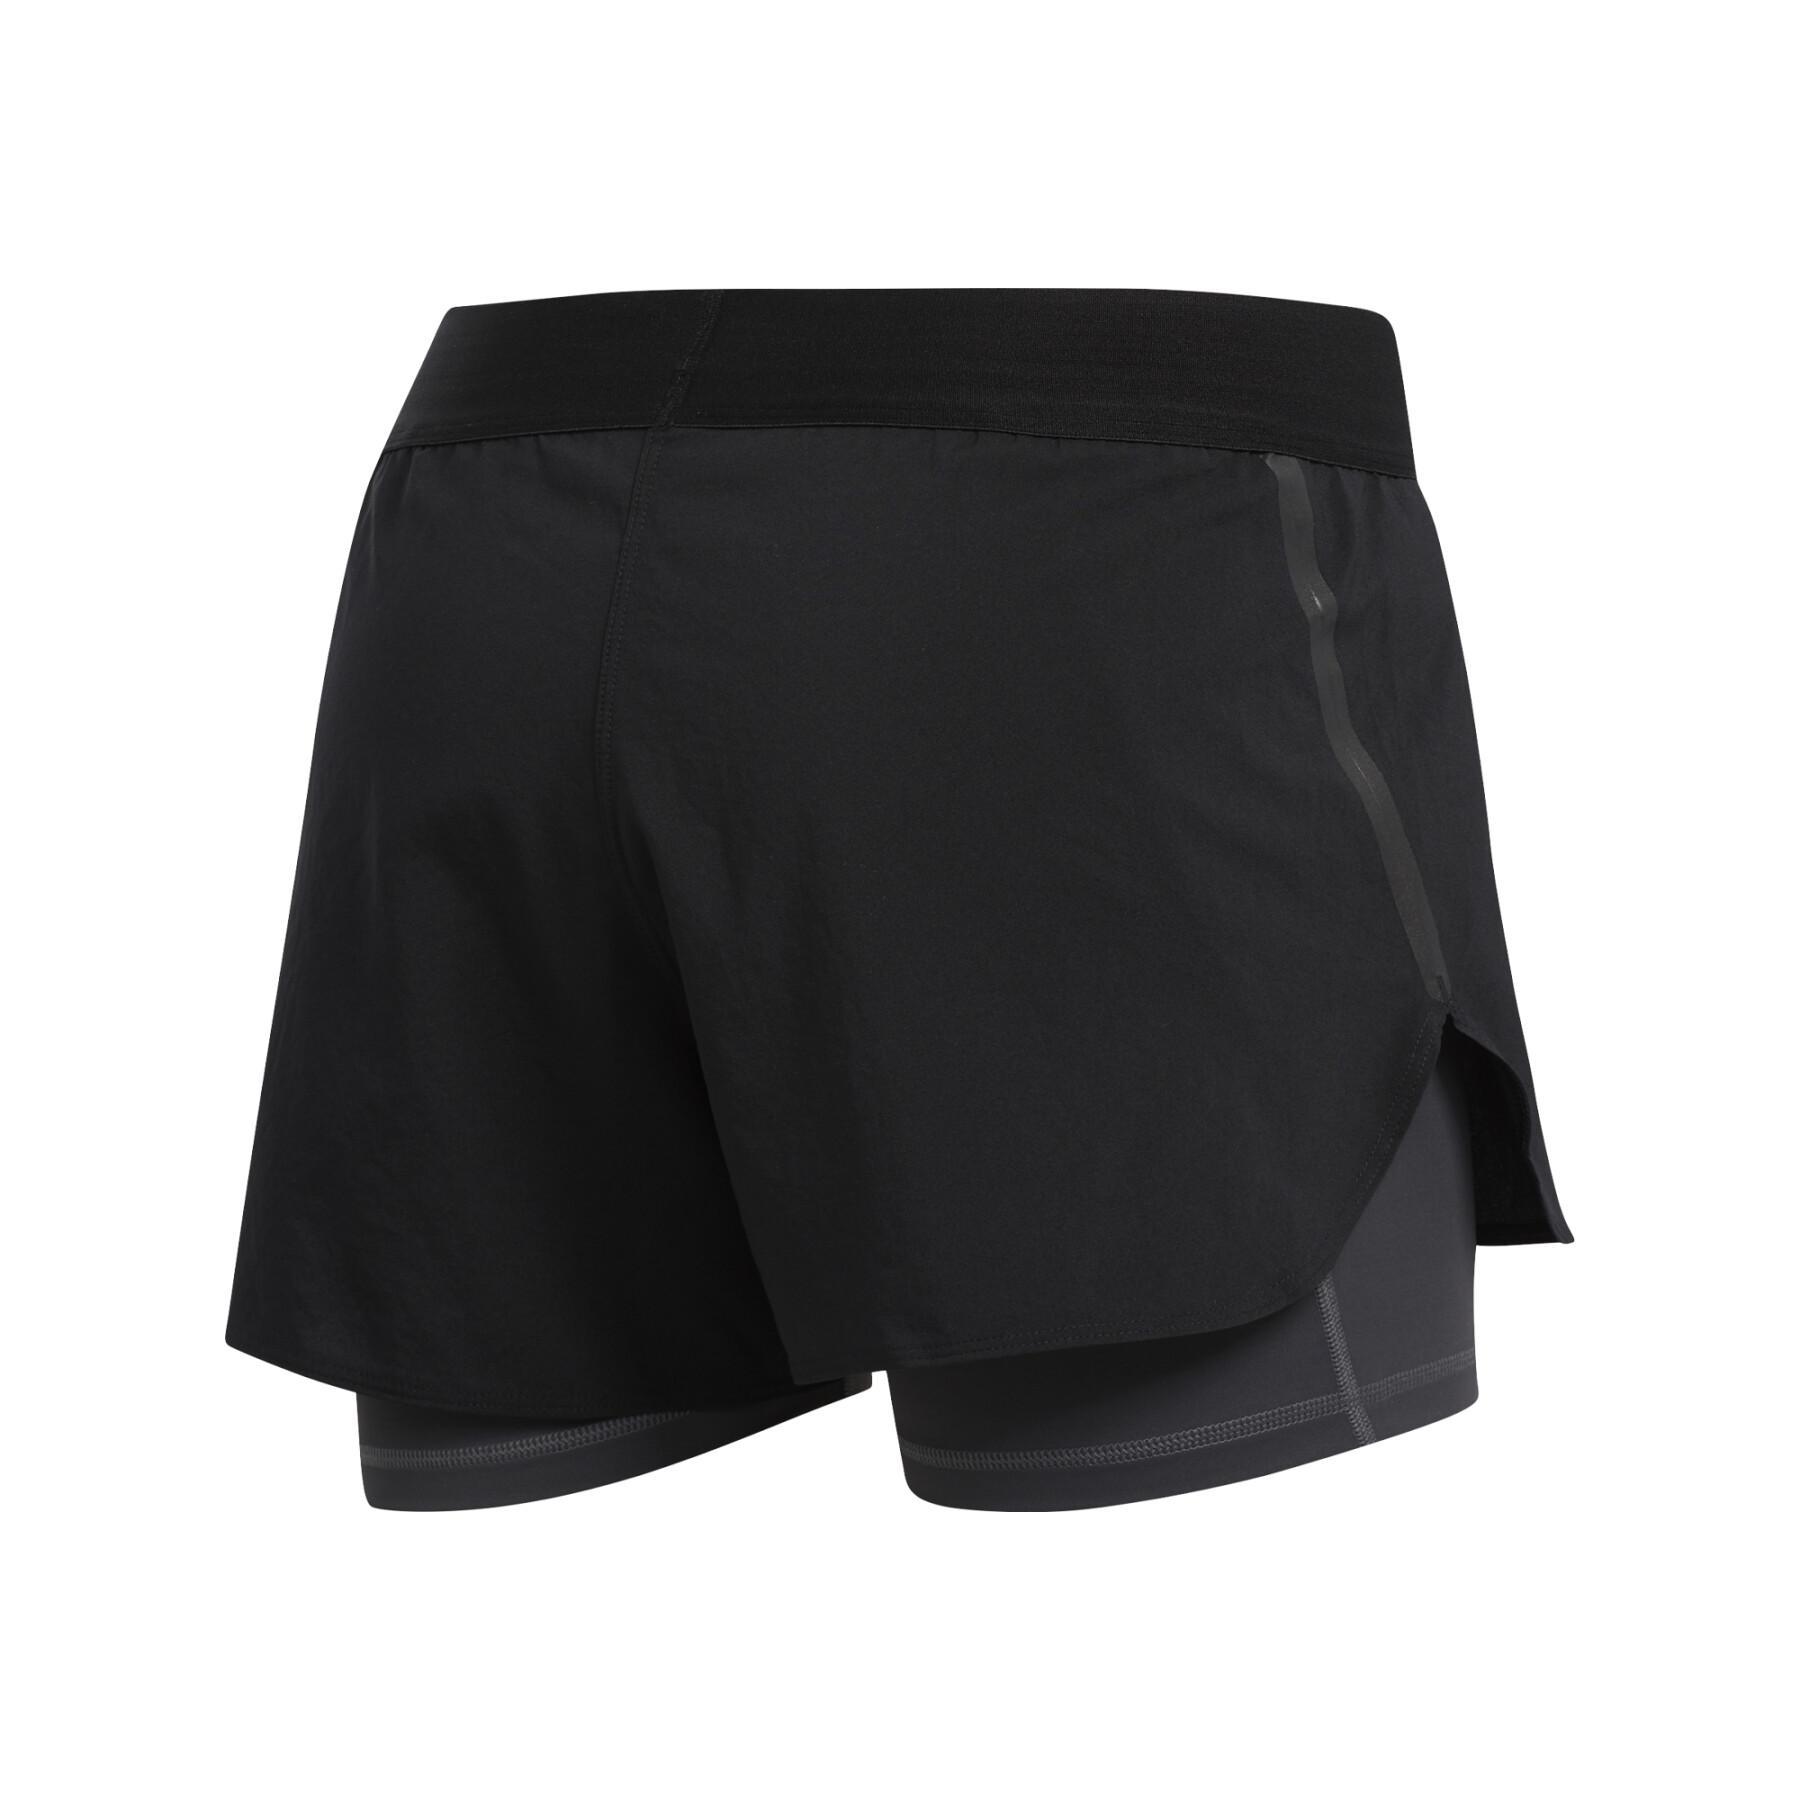 Women's shorts adidas Alphaskin Two-in-One